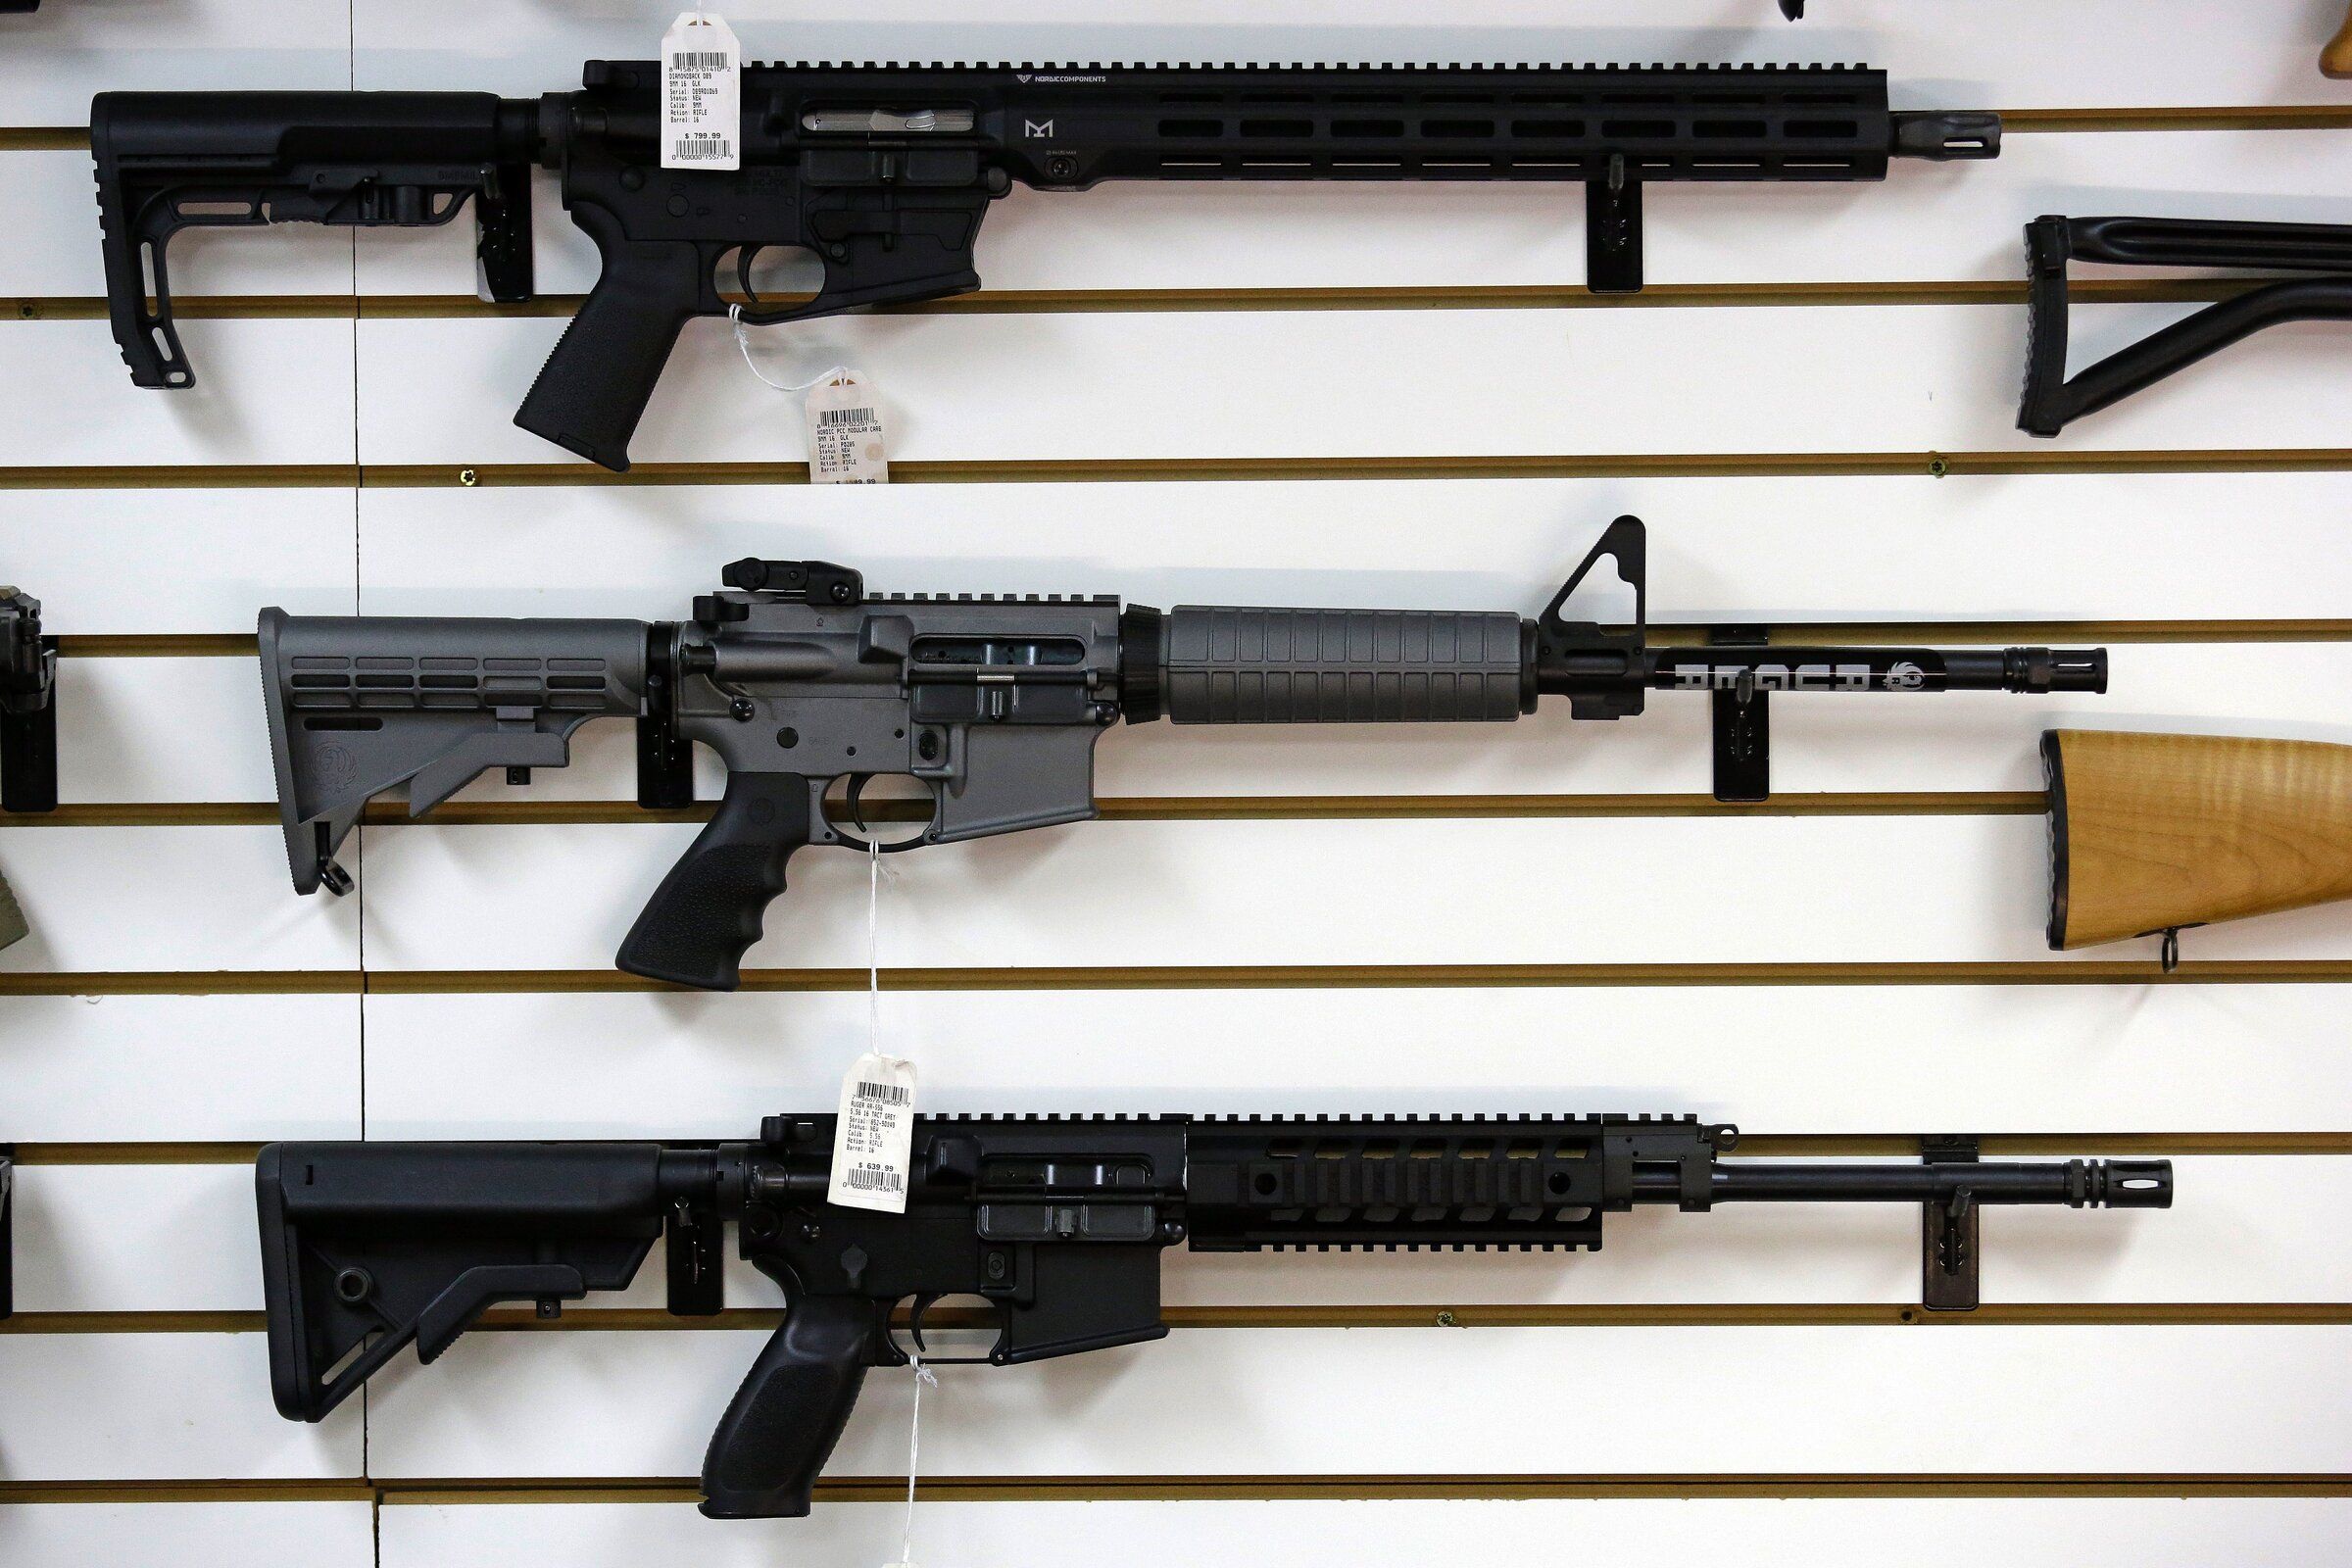 WA bans sale of AR-15s and other semi-automatic rifles, effective